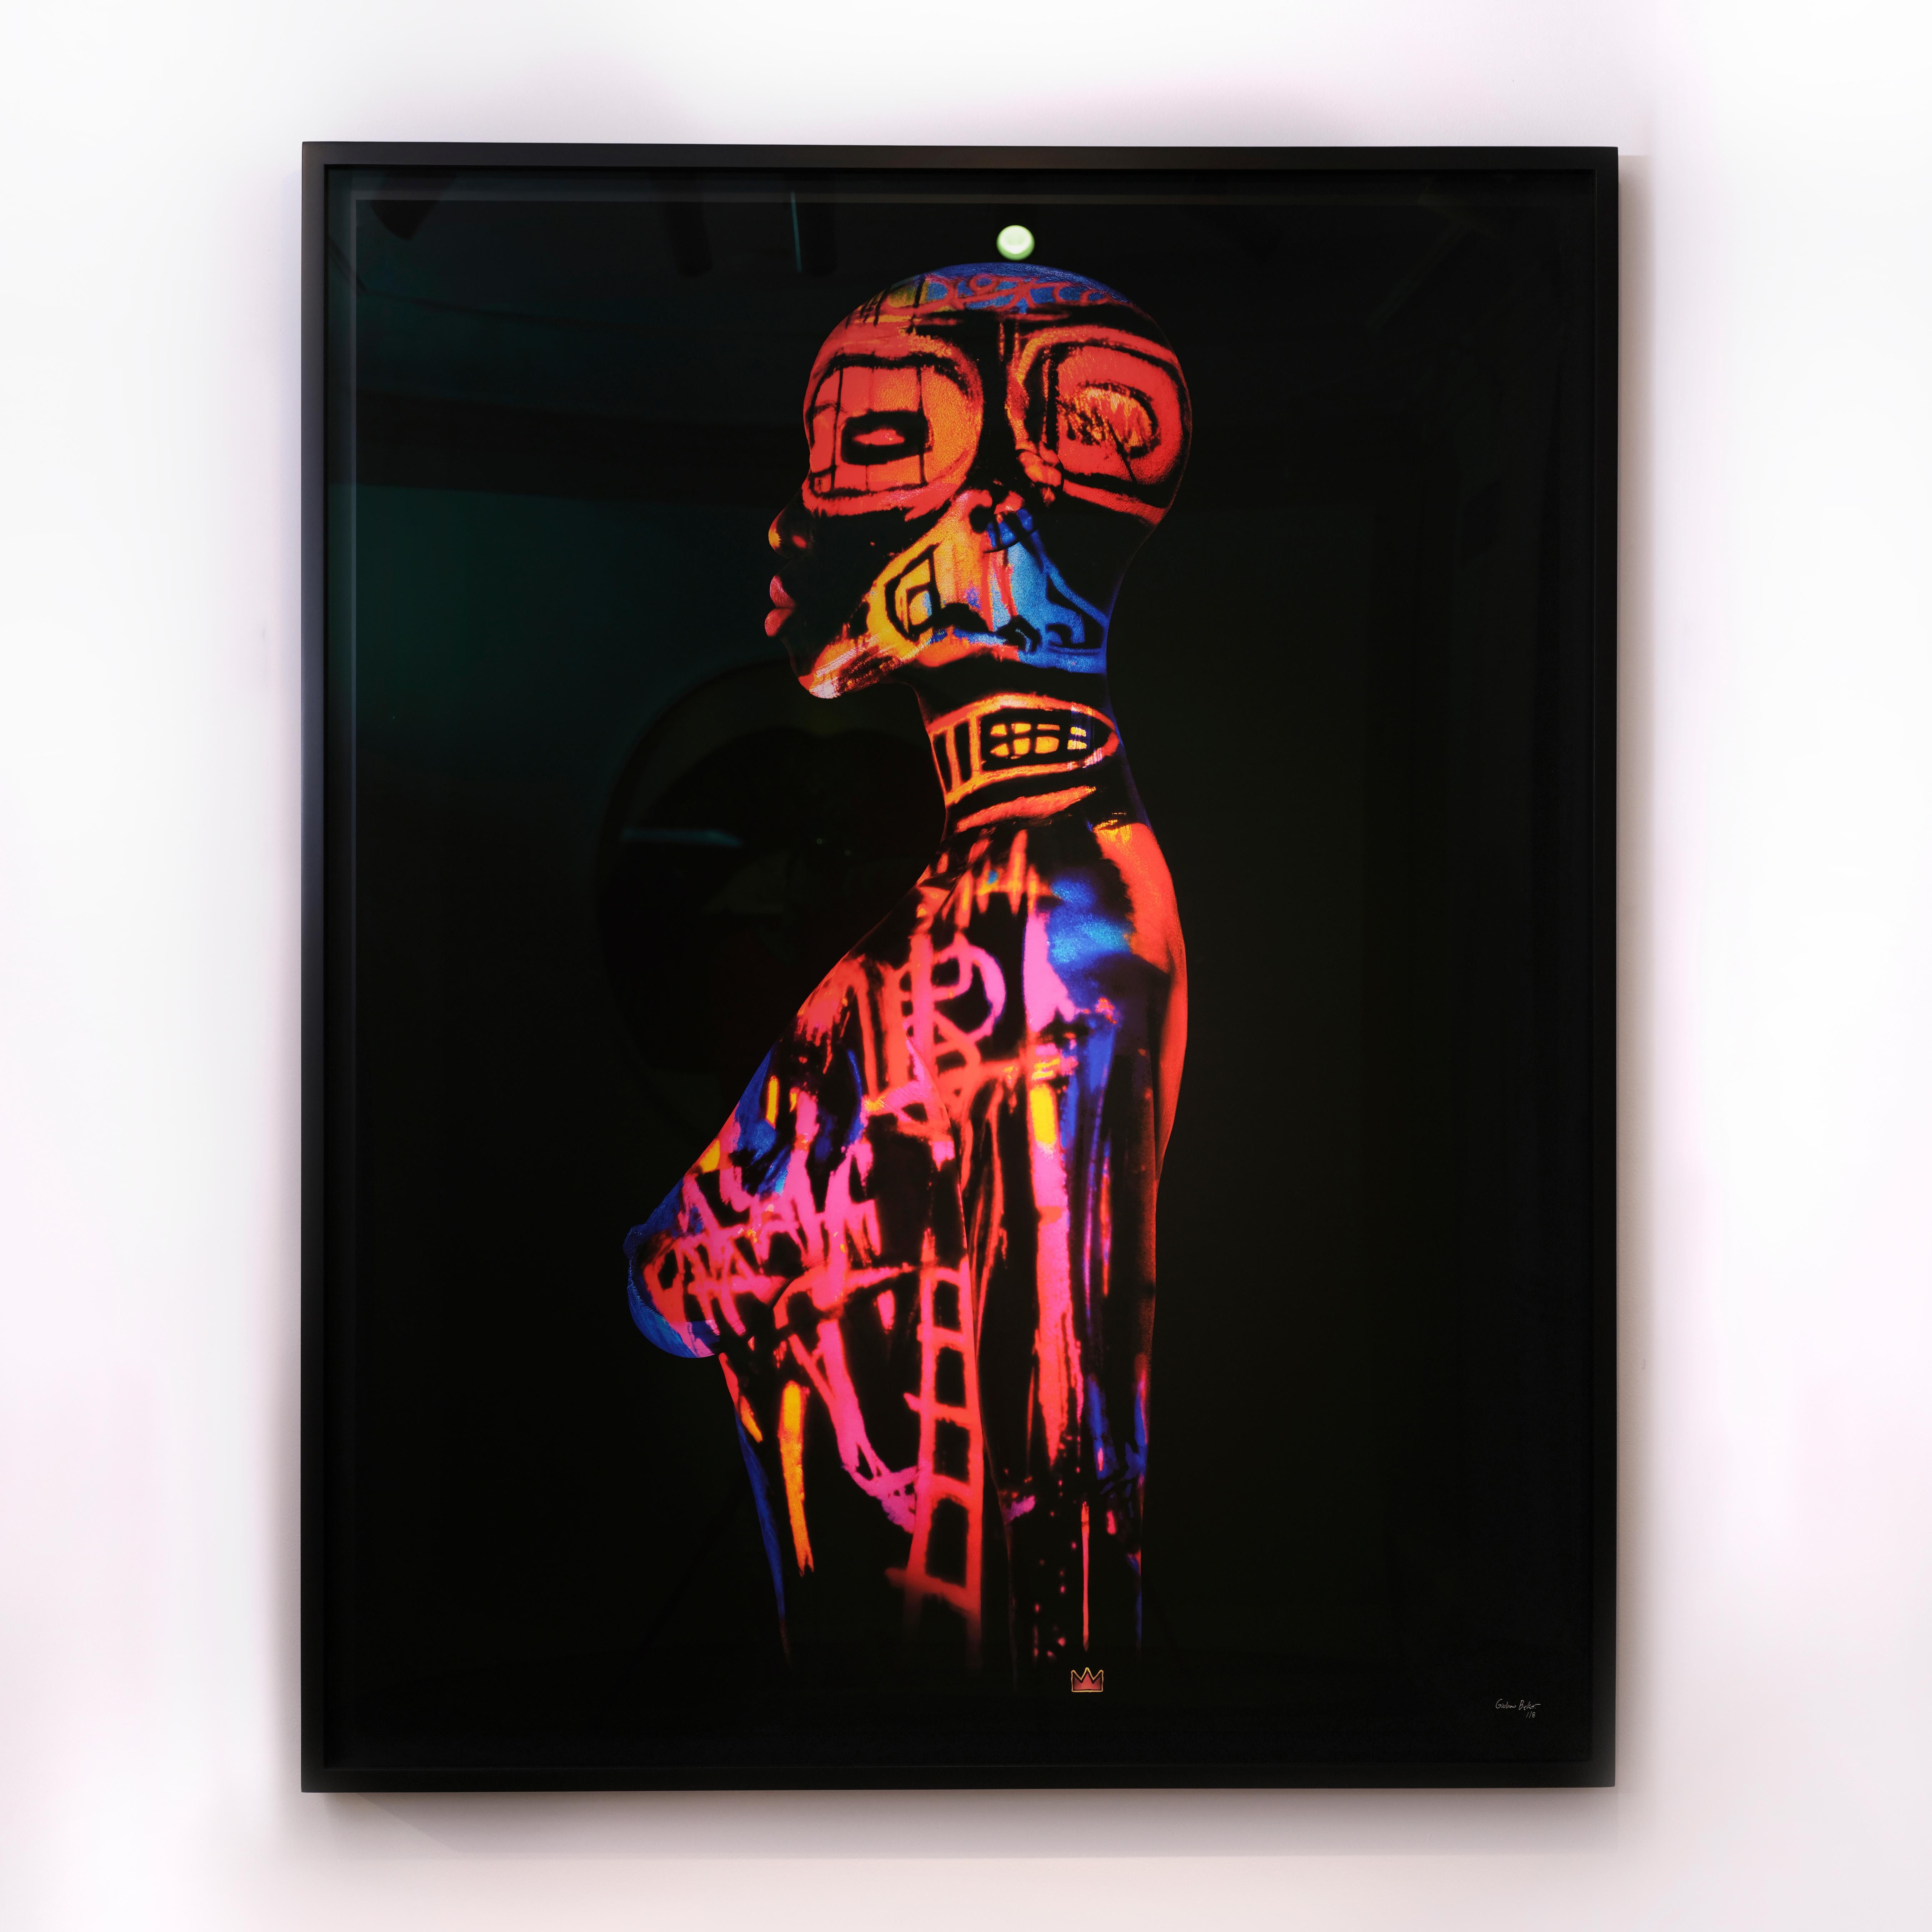 "JM Basquiat-GB1" Photography (FRAMED) 50" x 40" inch Ed. of 8 by Giuliano Bekor